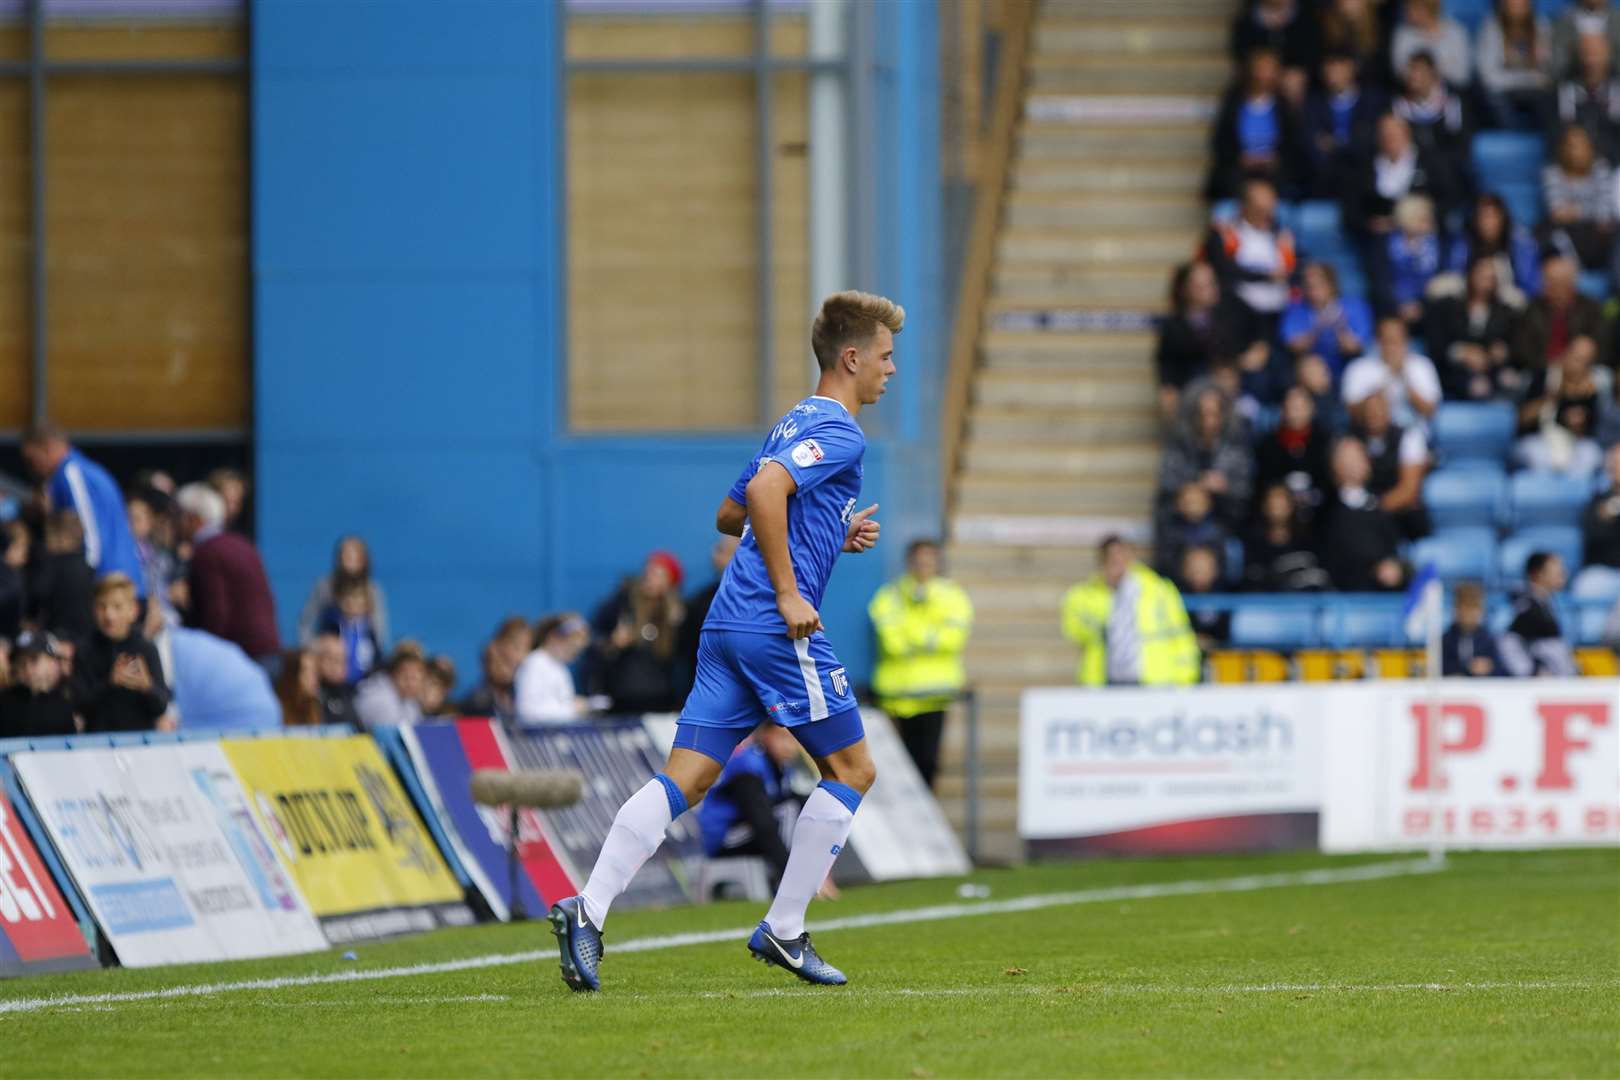 Jack Tucker plays the second half against Portsmouth in October 2017 to make his Football League debut Picture: Andy Jones